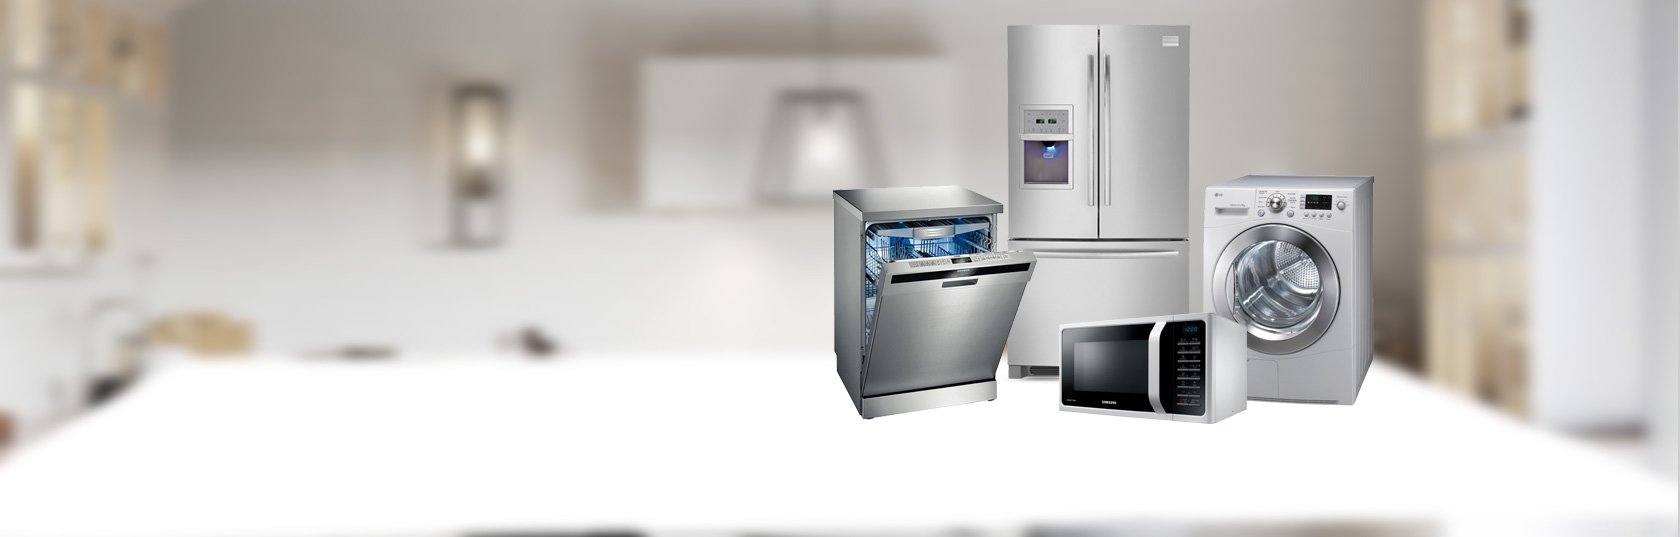 A kitchen with a dishwasher, refrigerator and microwave.